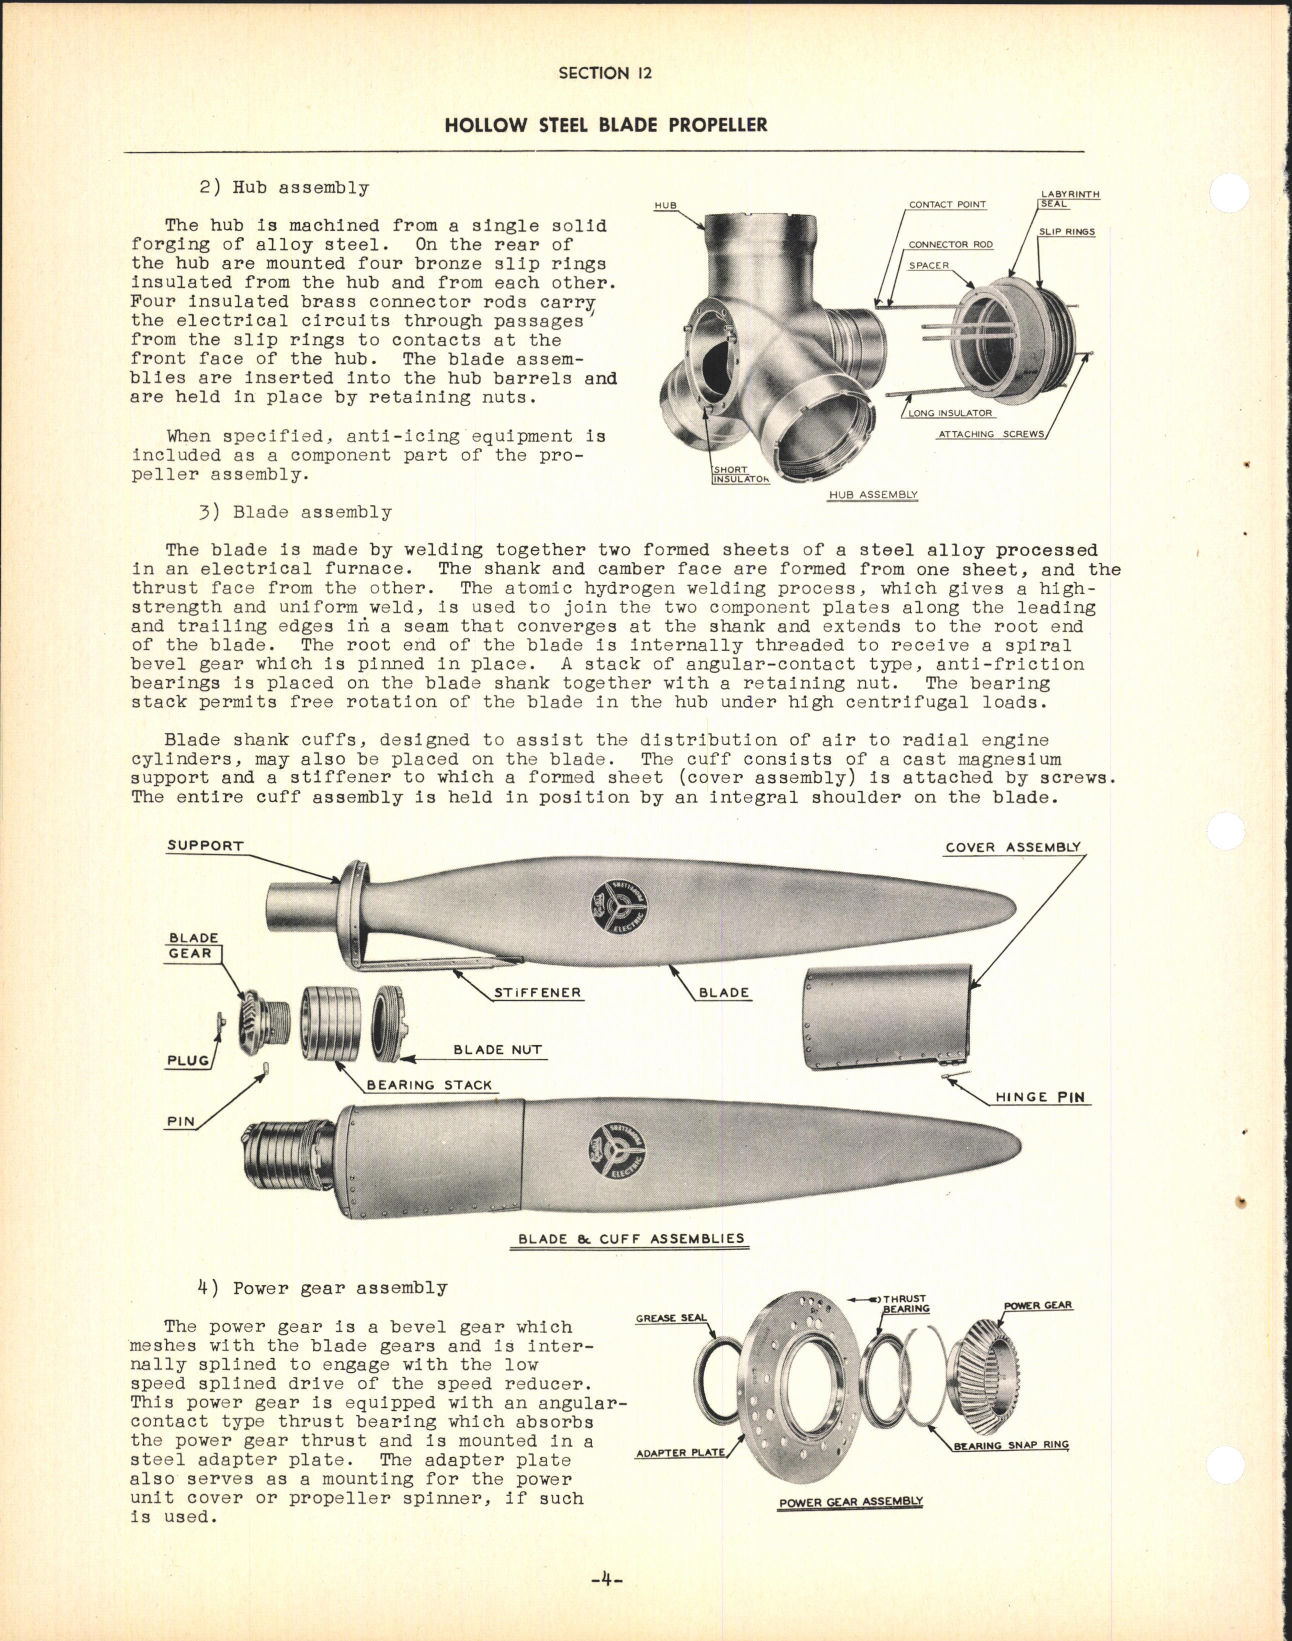 Sample page 6 from AirCorps Library document: Section 12 - Hollow Steel Blade Propeller (Three Blade)